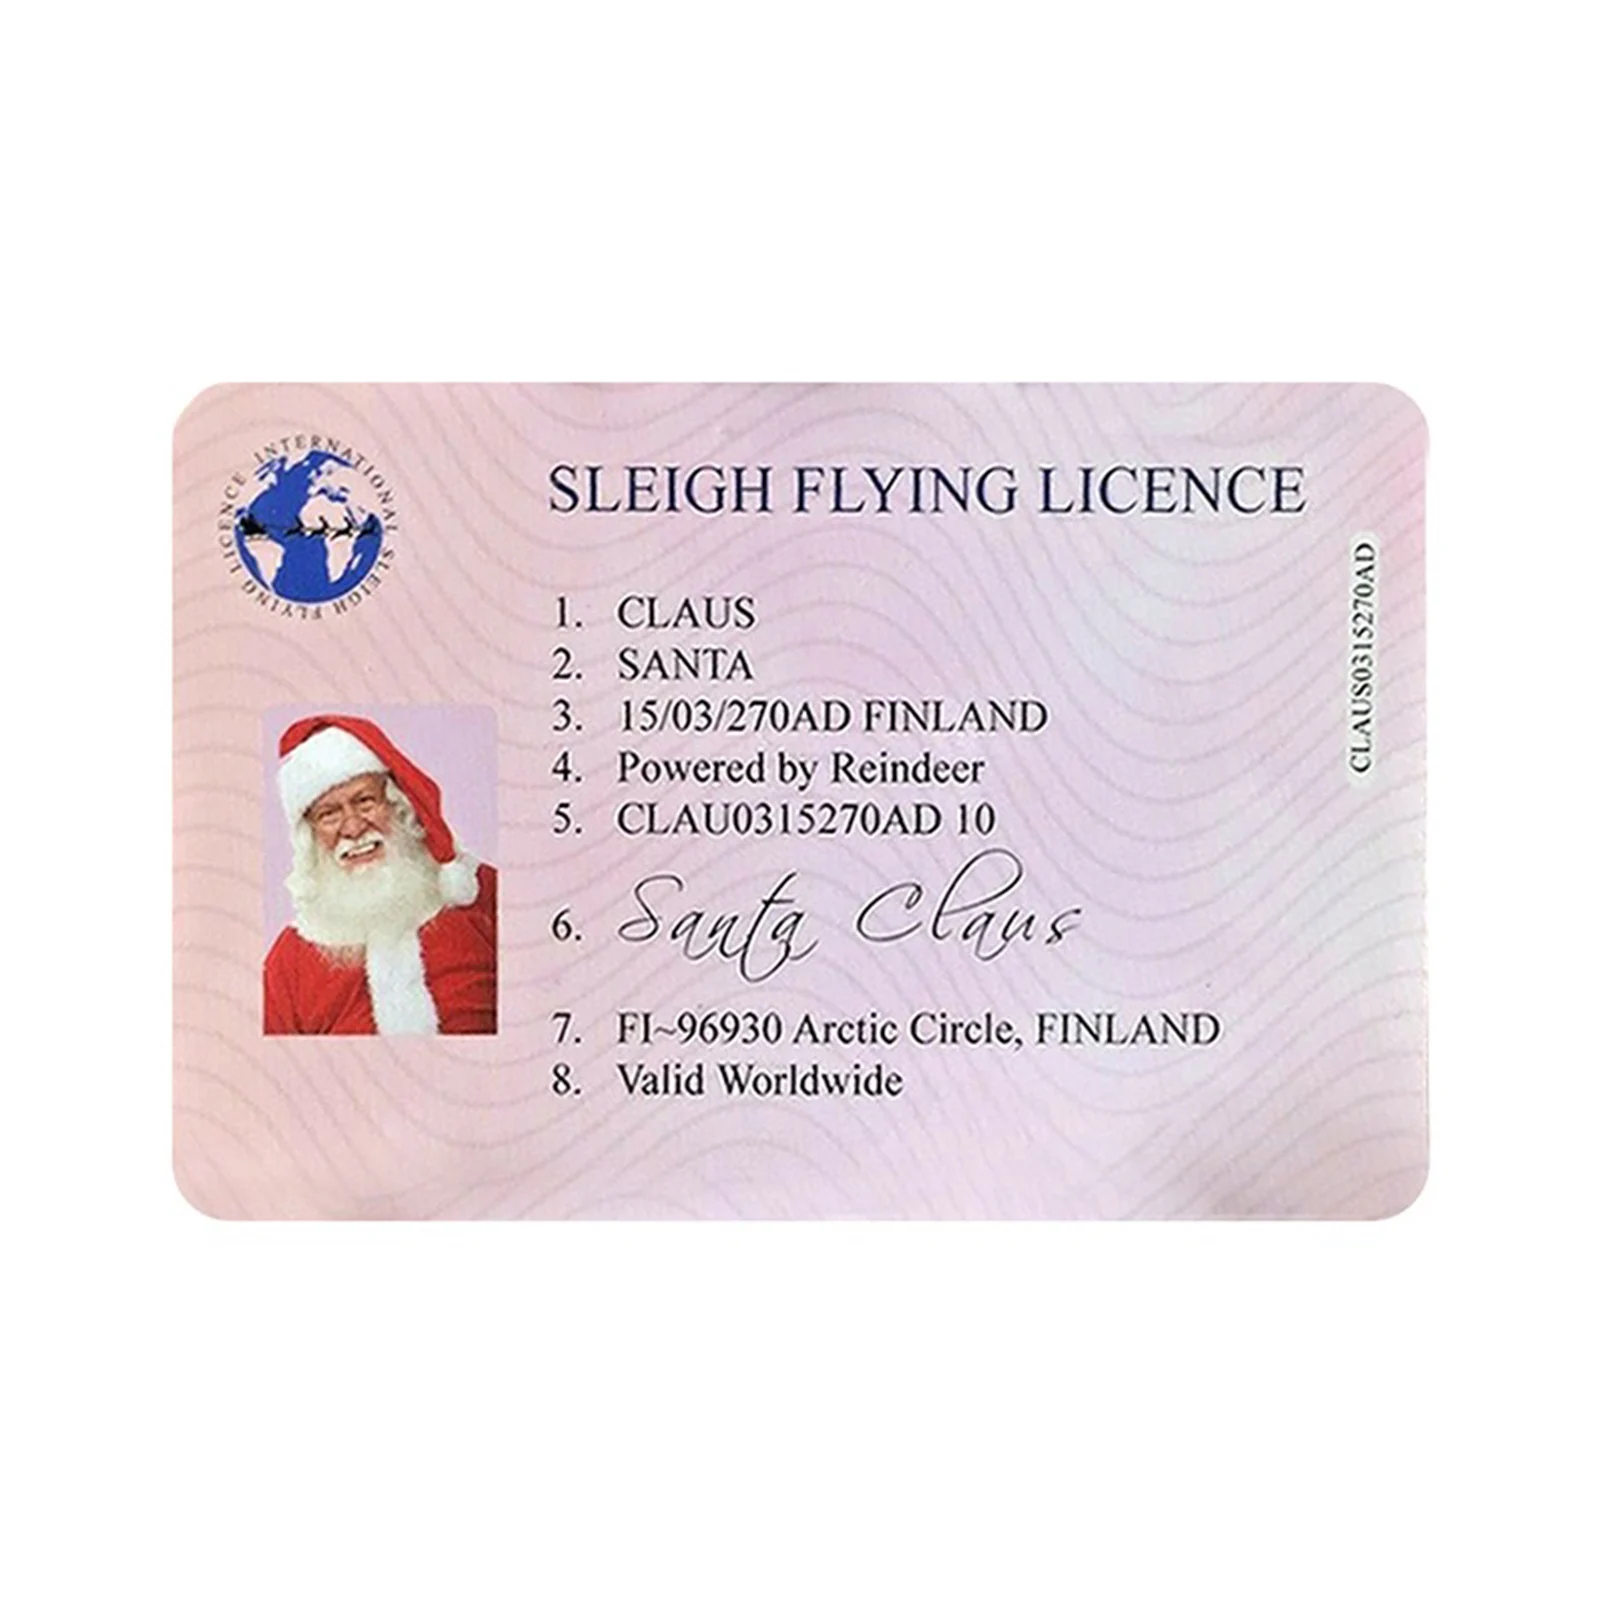 

Santa Claus Flight License Sleigh Riding Licence Tree Ornament Christmas Old Man Driver License Entertainment Props Elegantly